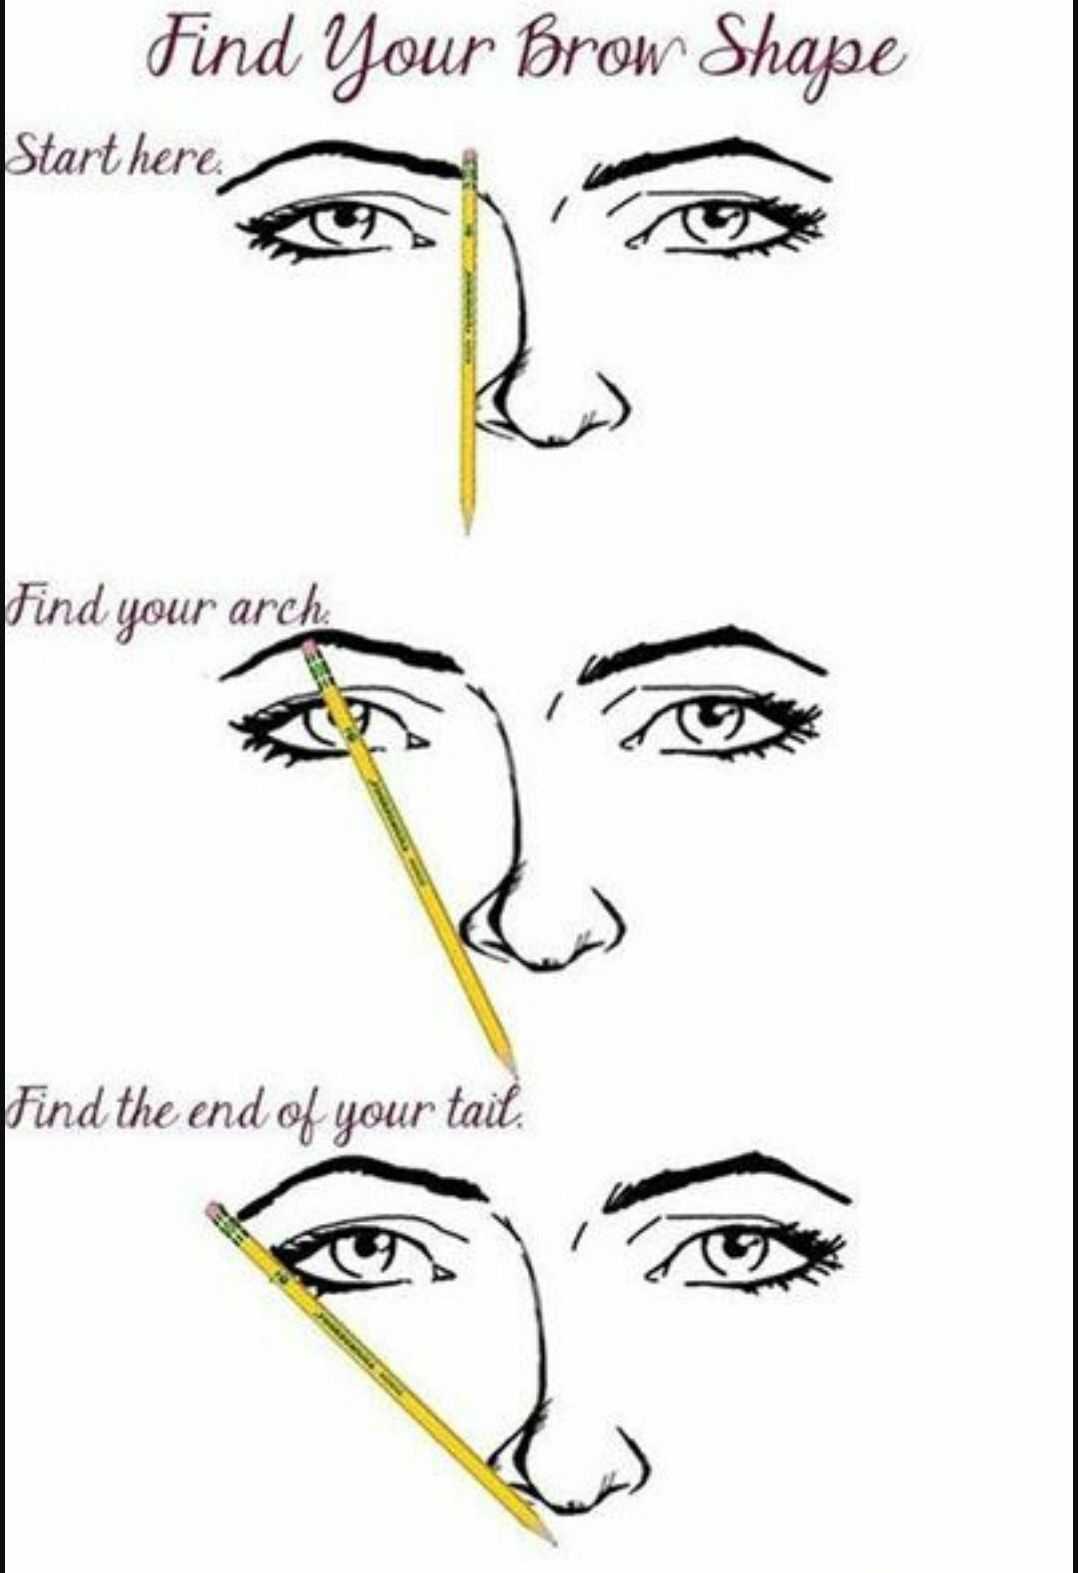 Find Your Brow Shape